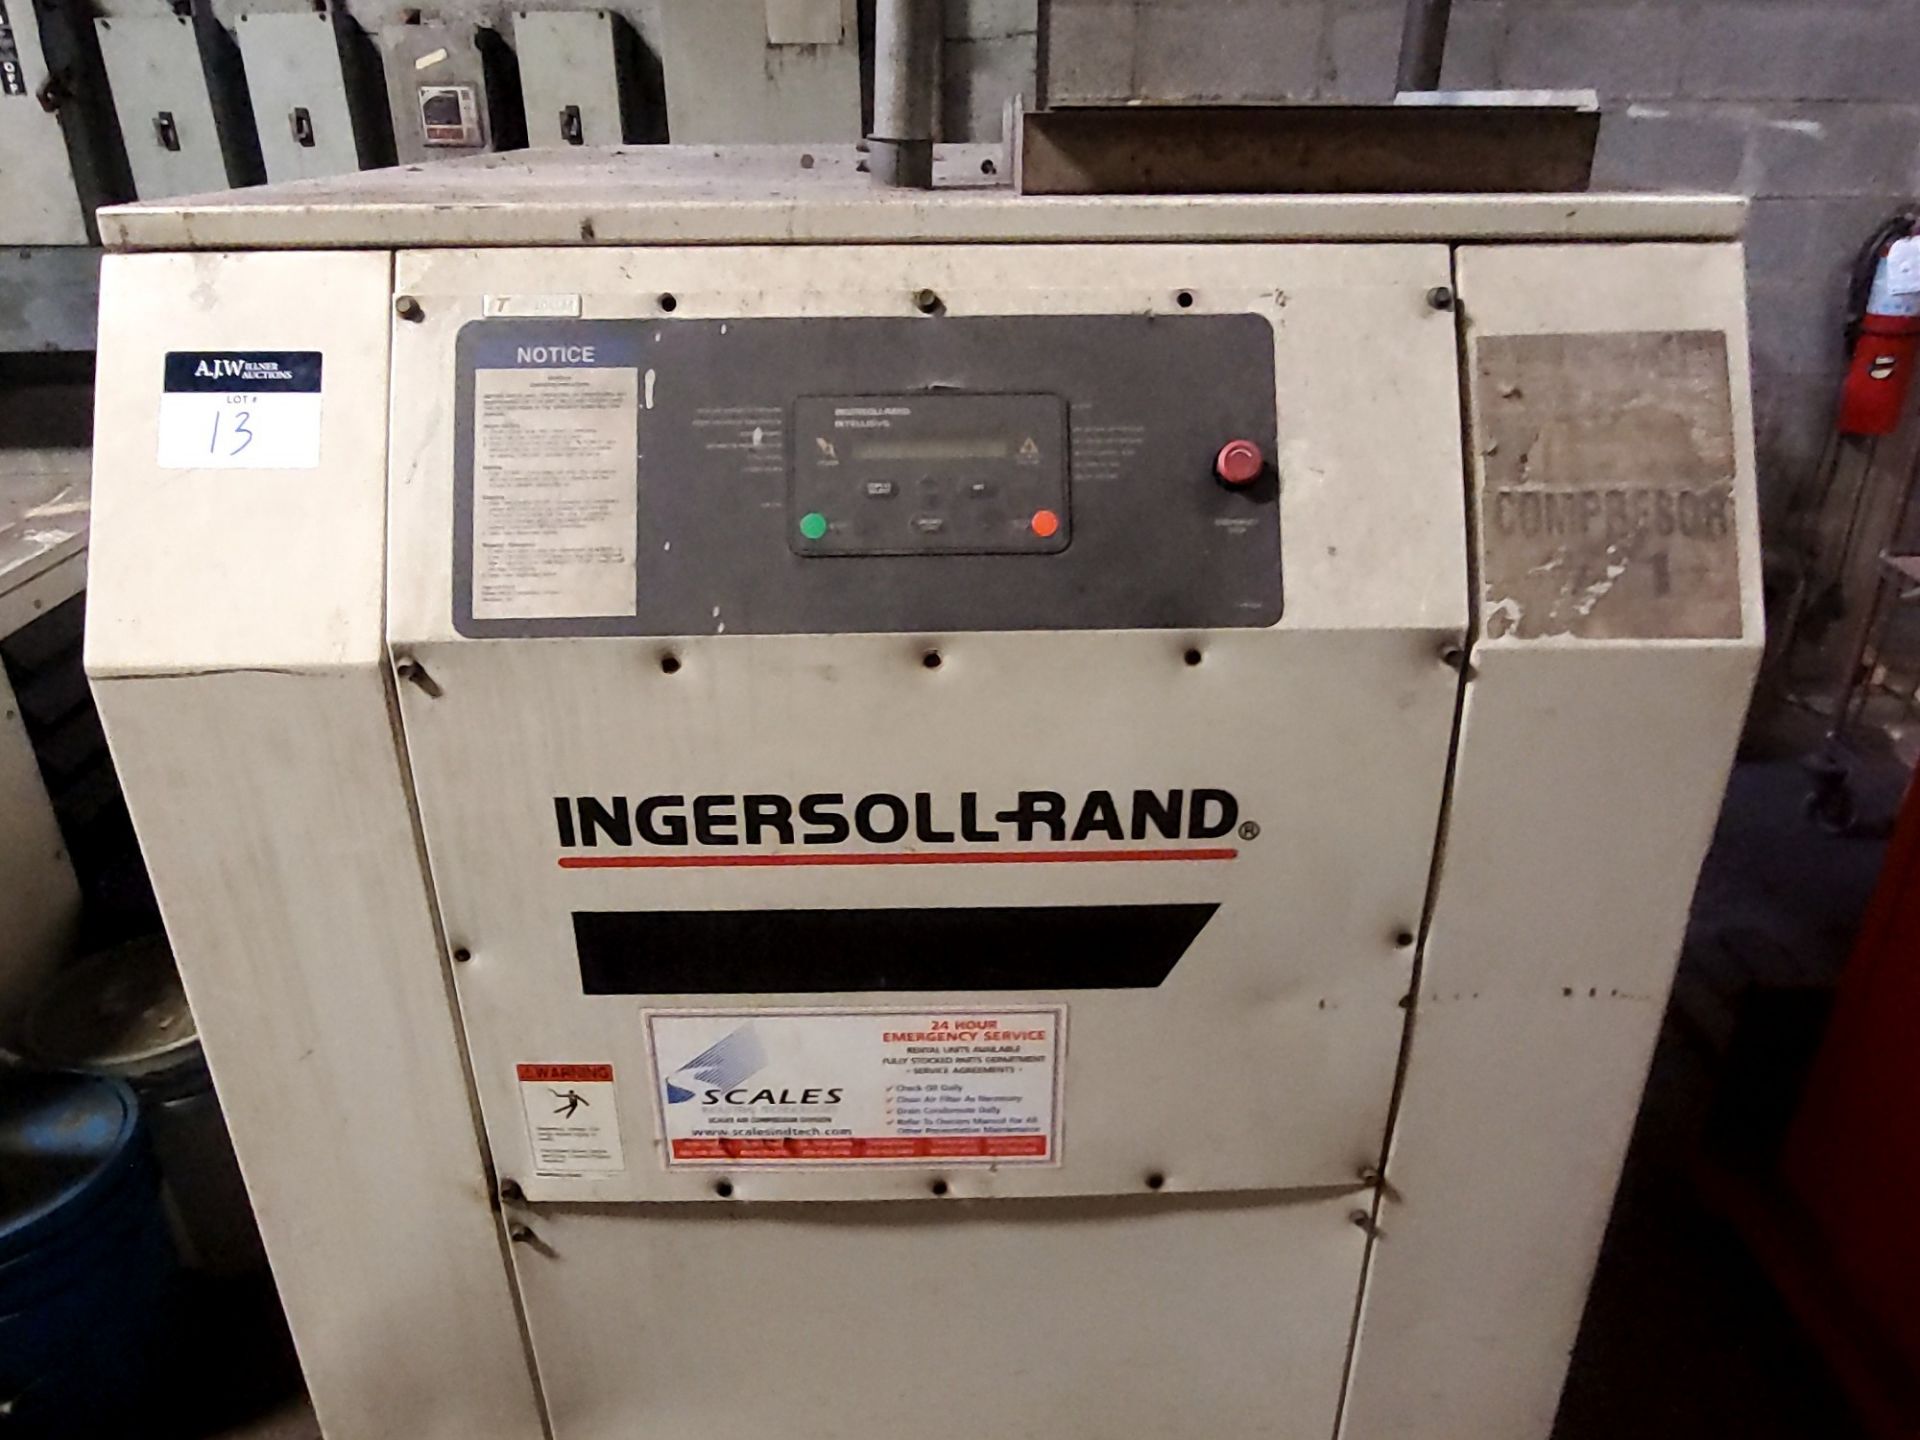 Ingersoll Rand SSR-EP40SE 127 Psi 157 CFM Rotary Screw Air Compressor - Image 2 of 6